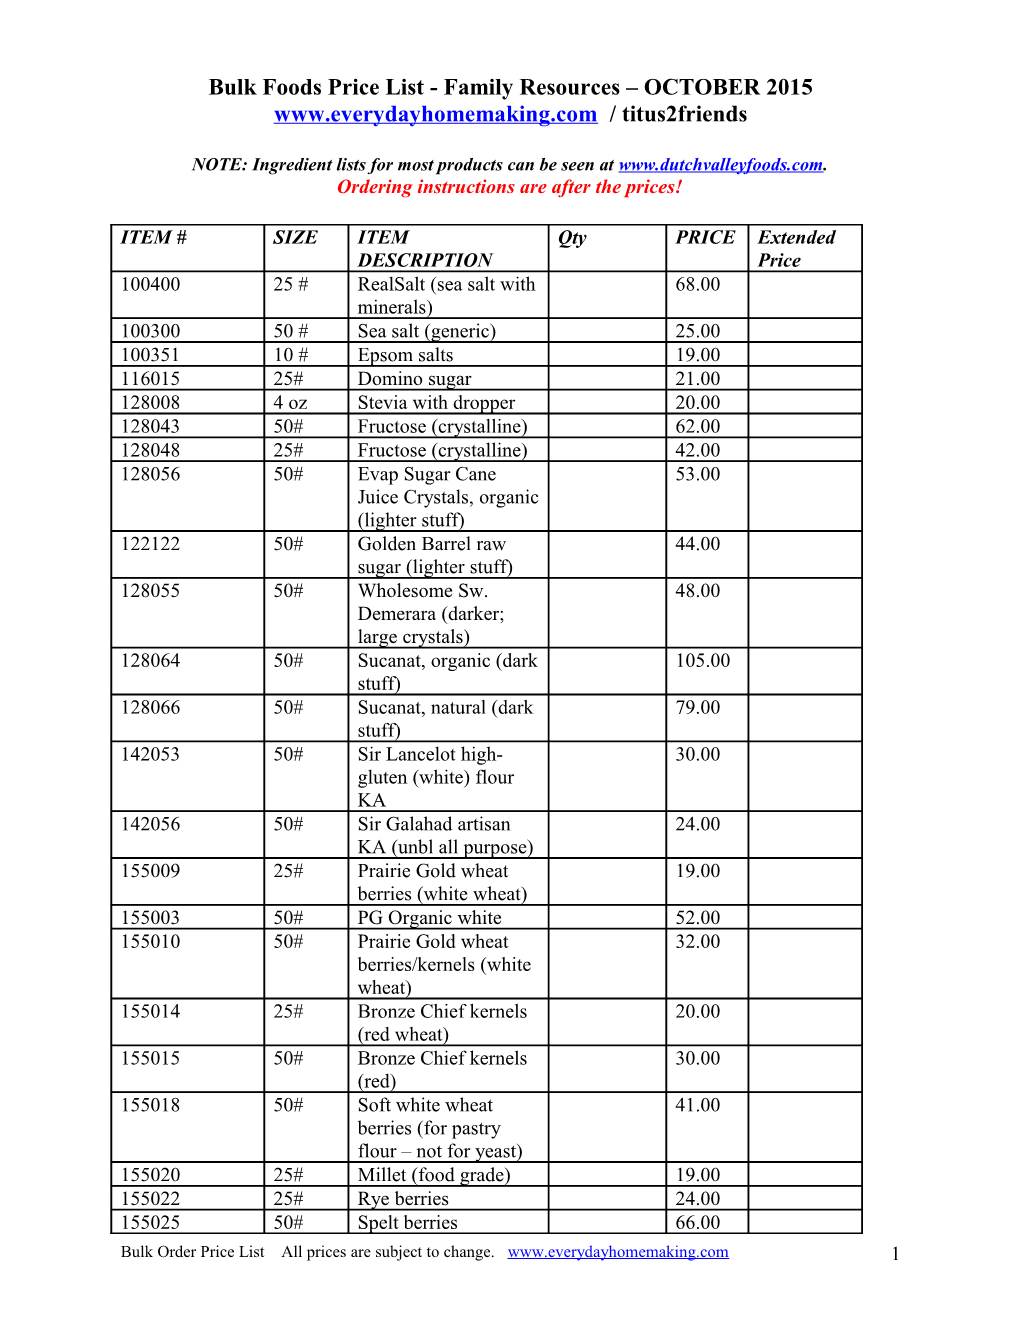 Bulk Foods Price List -Family Resources OCTOBER 2015